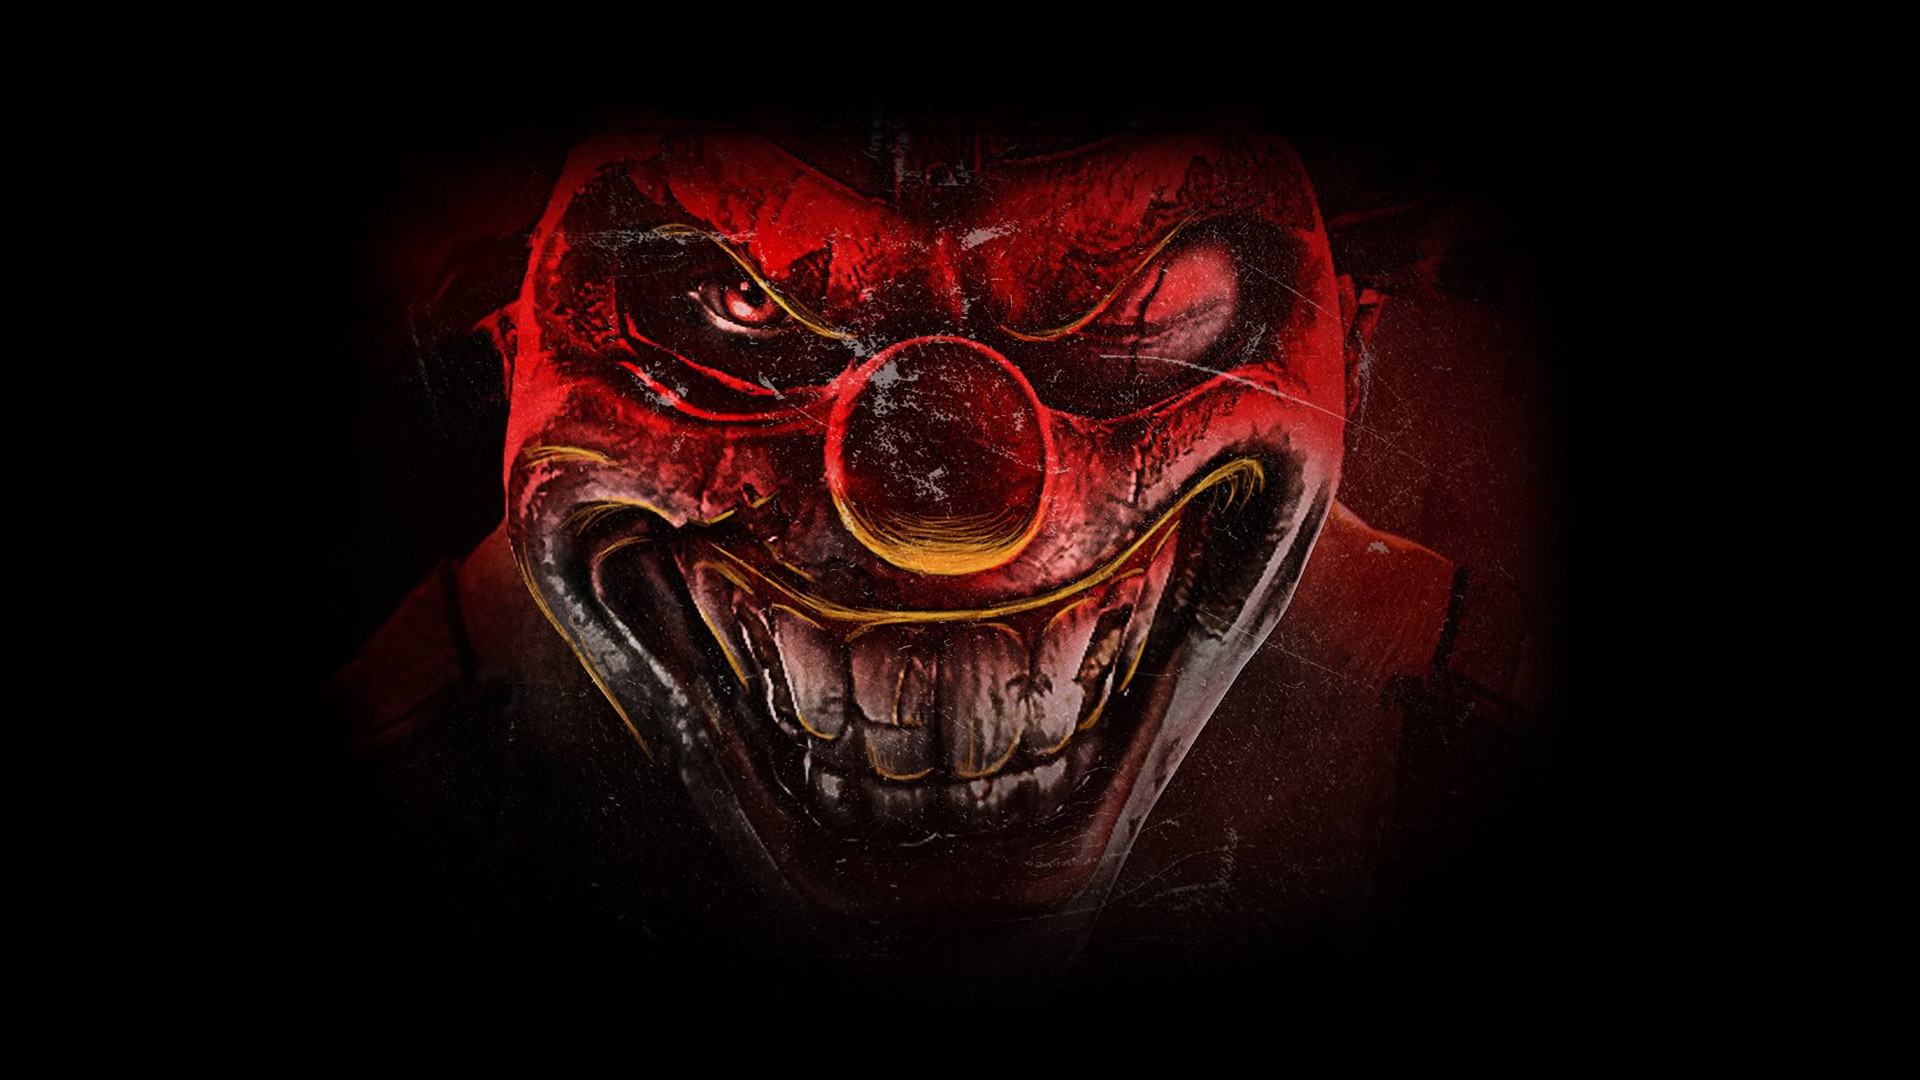 twisted metal pc game